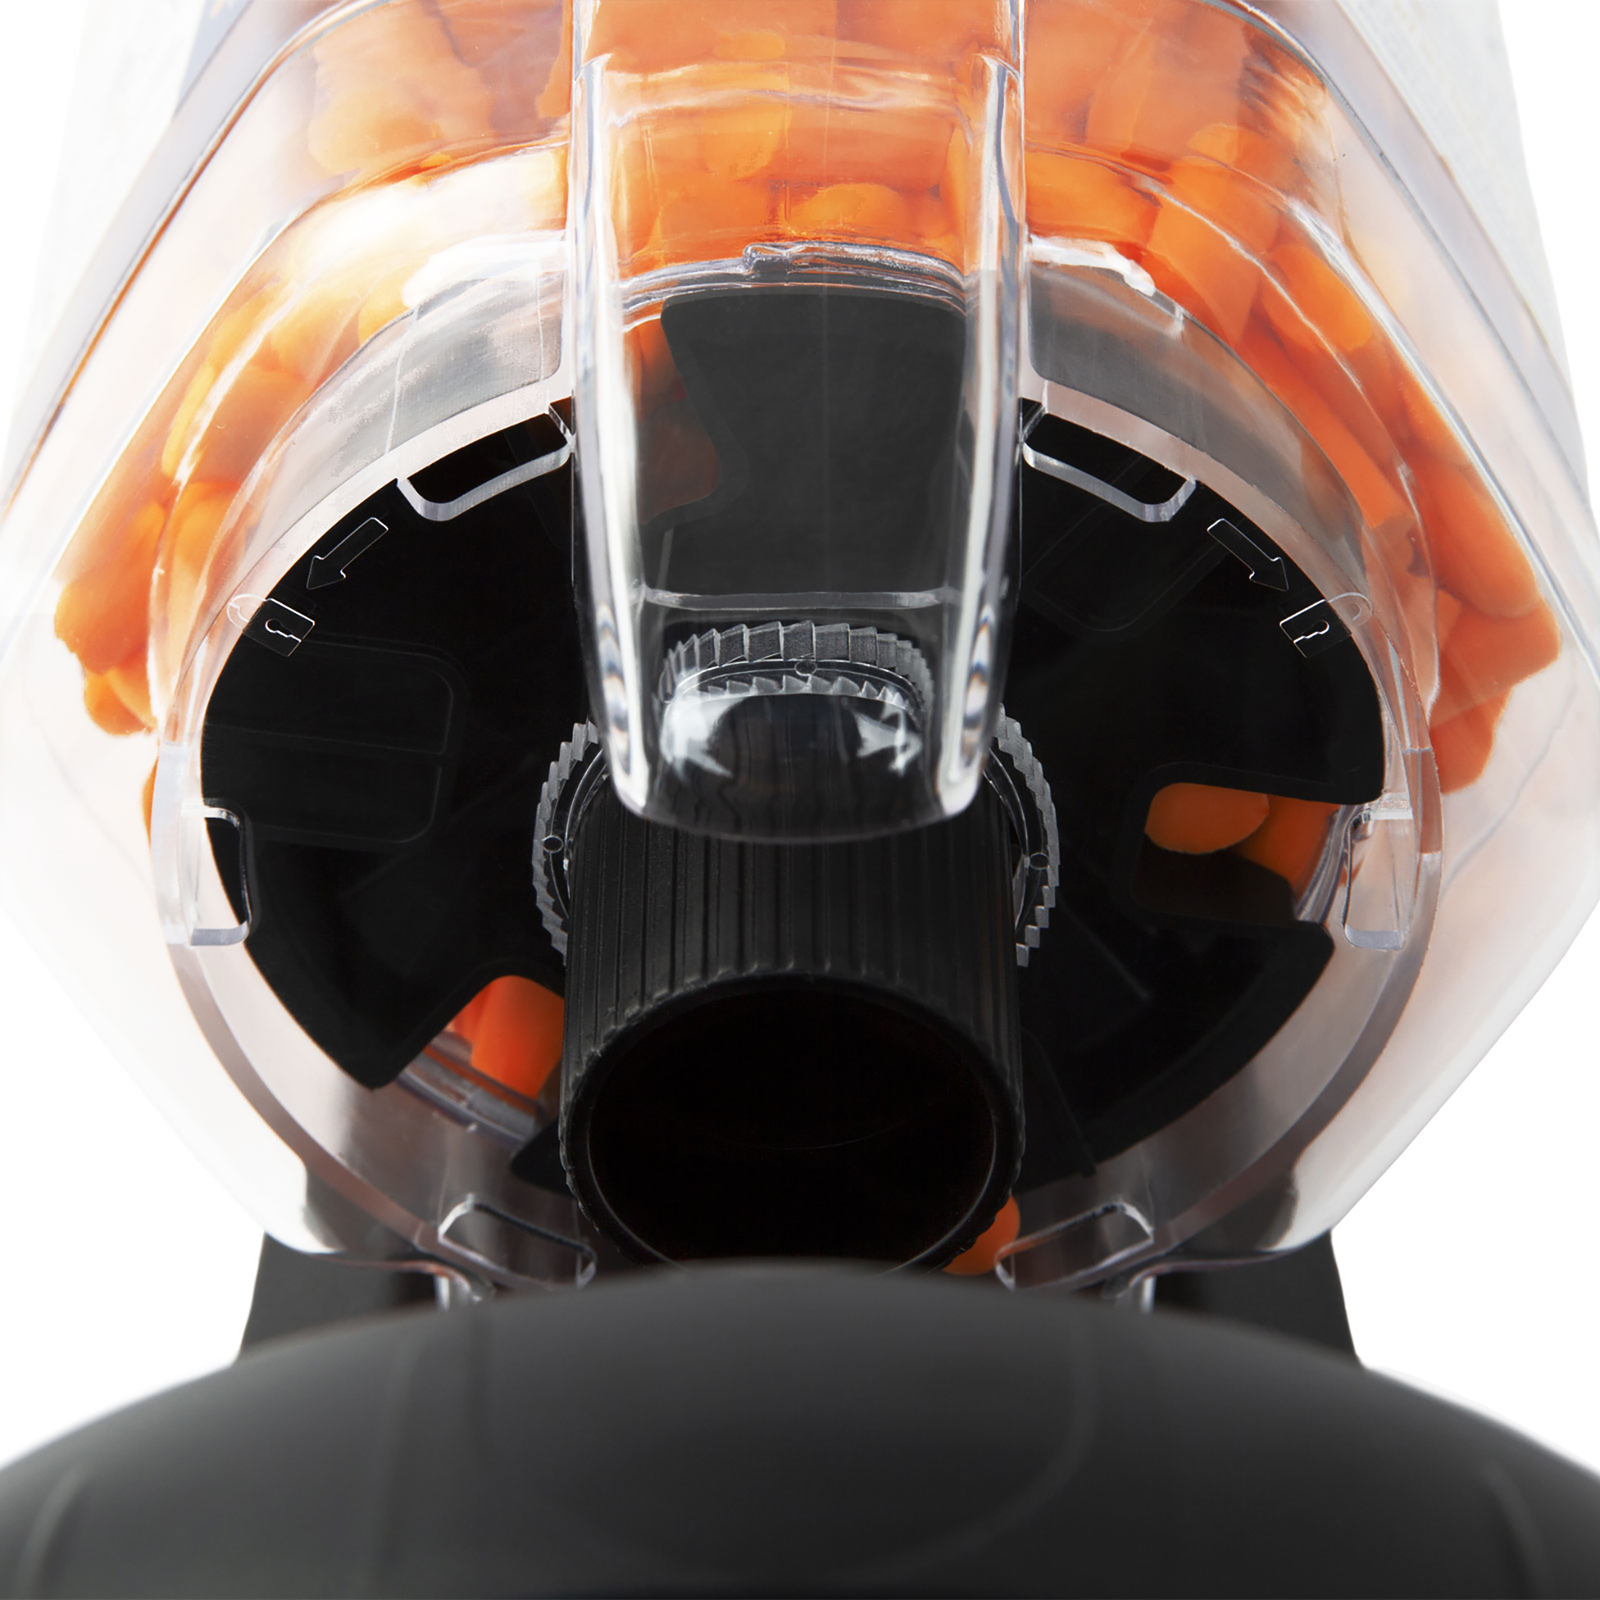 Close-up of the black rotary mechanism that dispenses the ear plugs